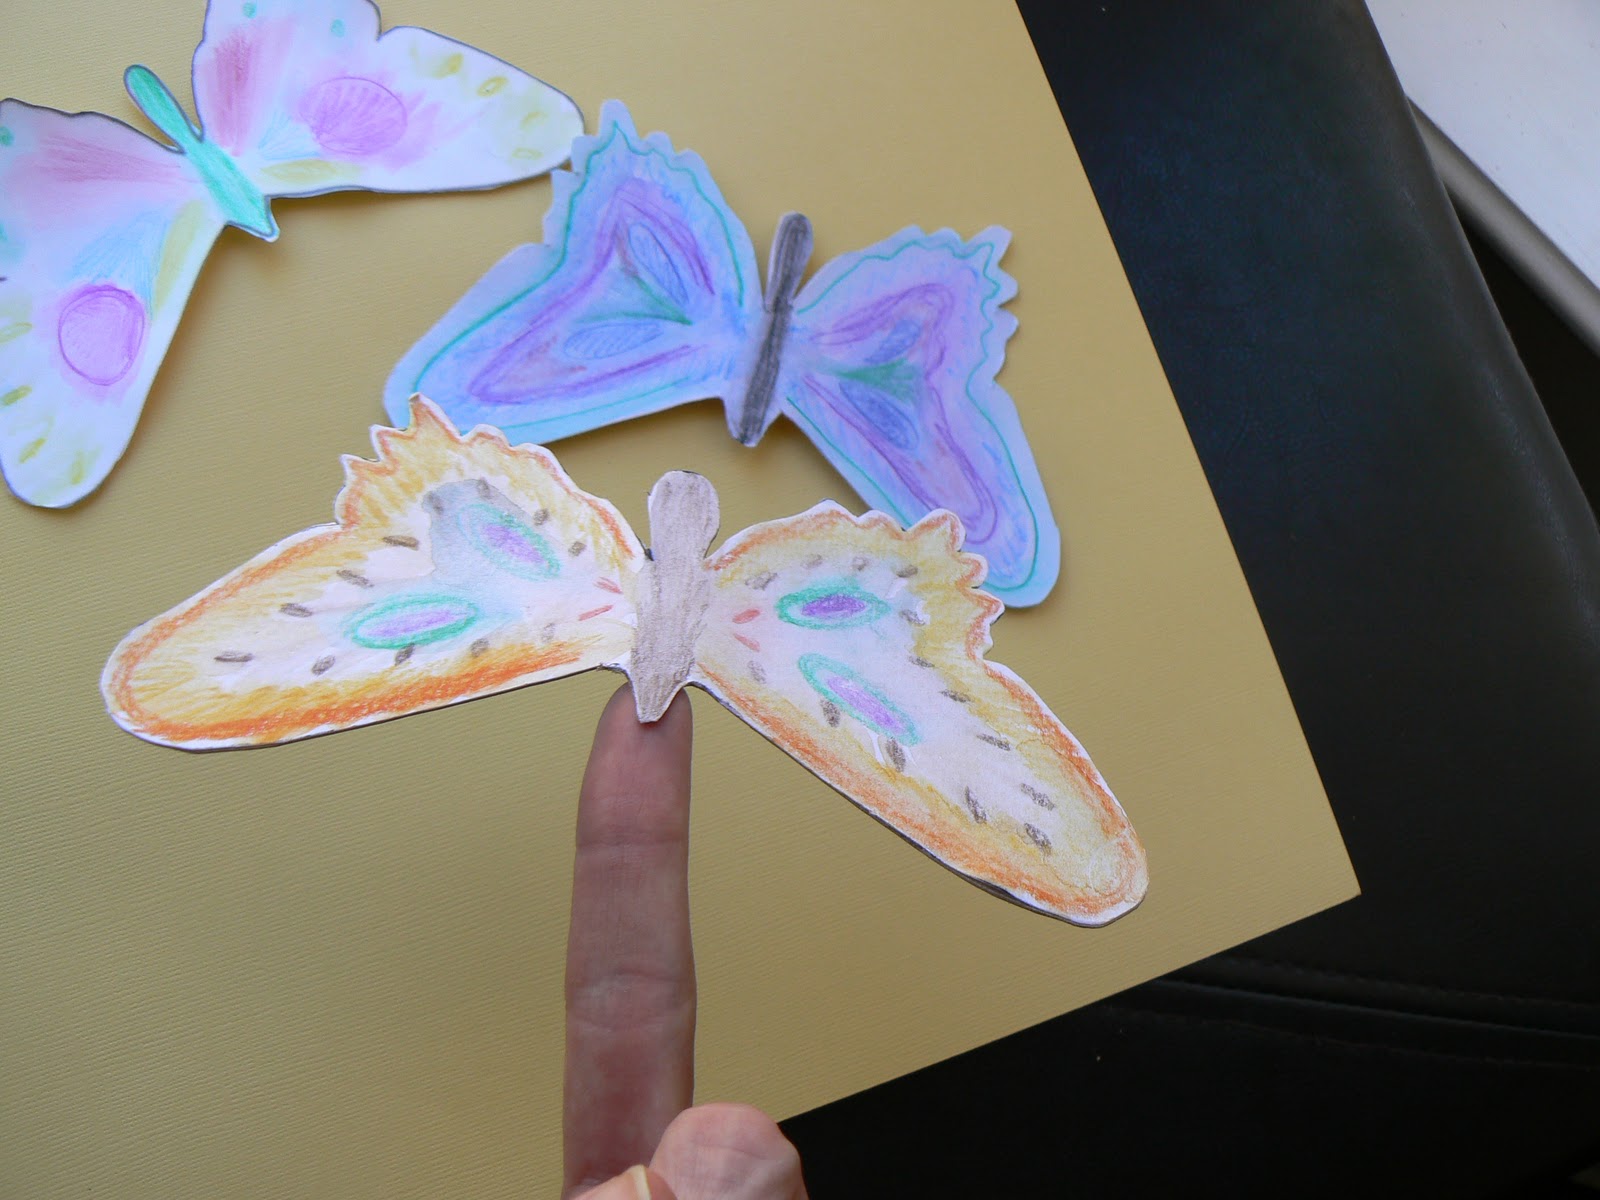 Bug crafts for kids - The Craft Train